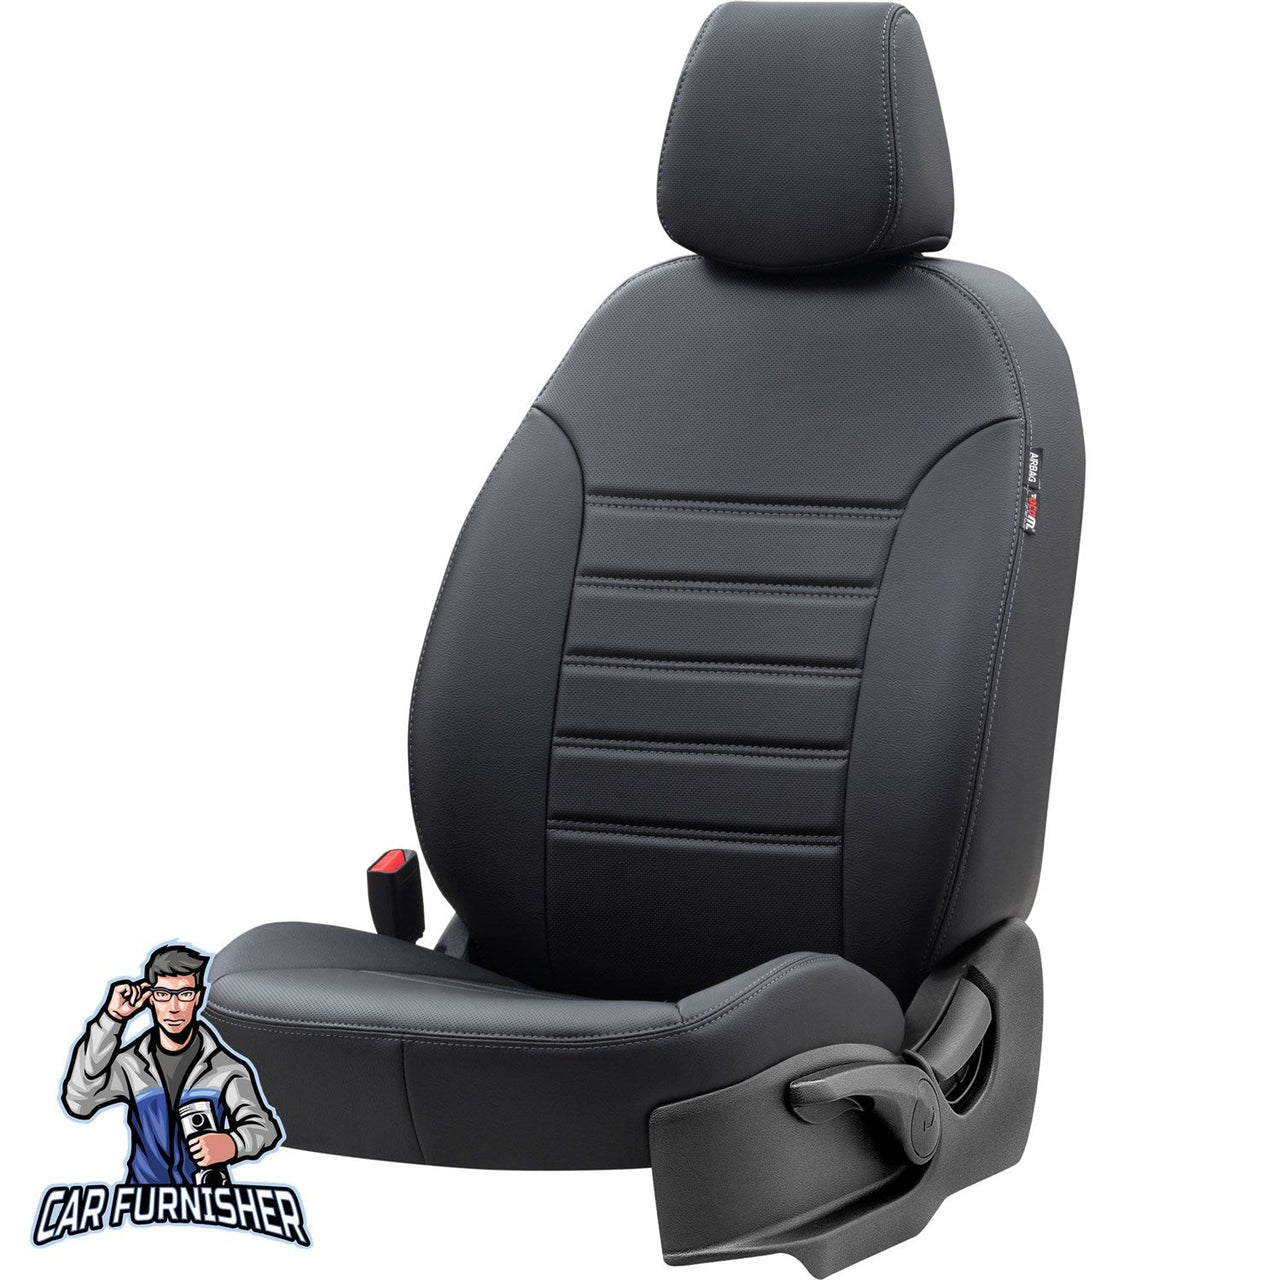 Fiat Albea Seat Covers Istanbul Leather Design Black Leather